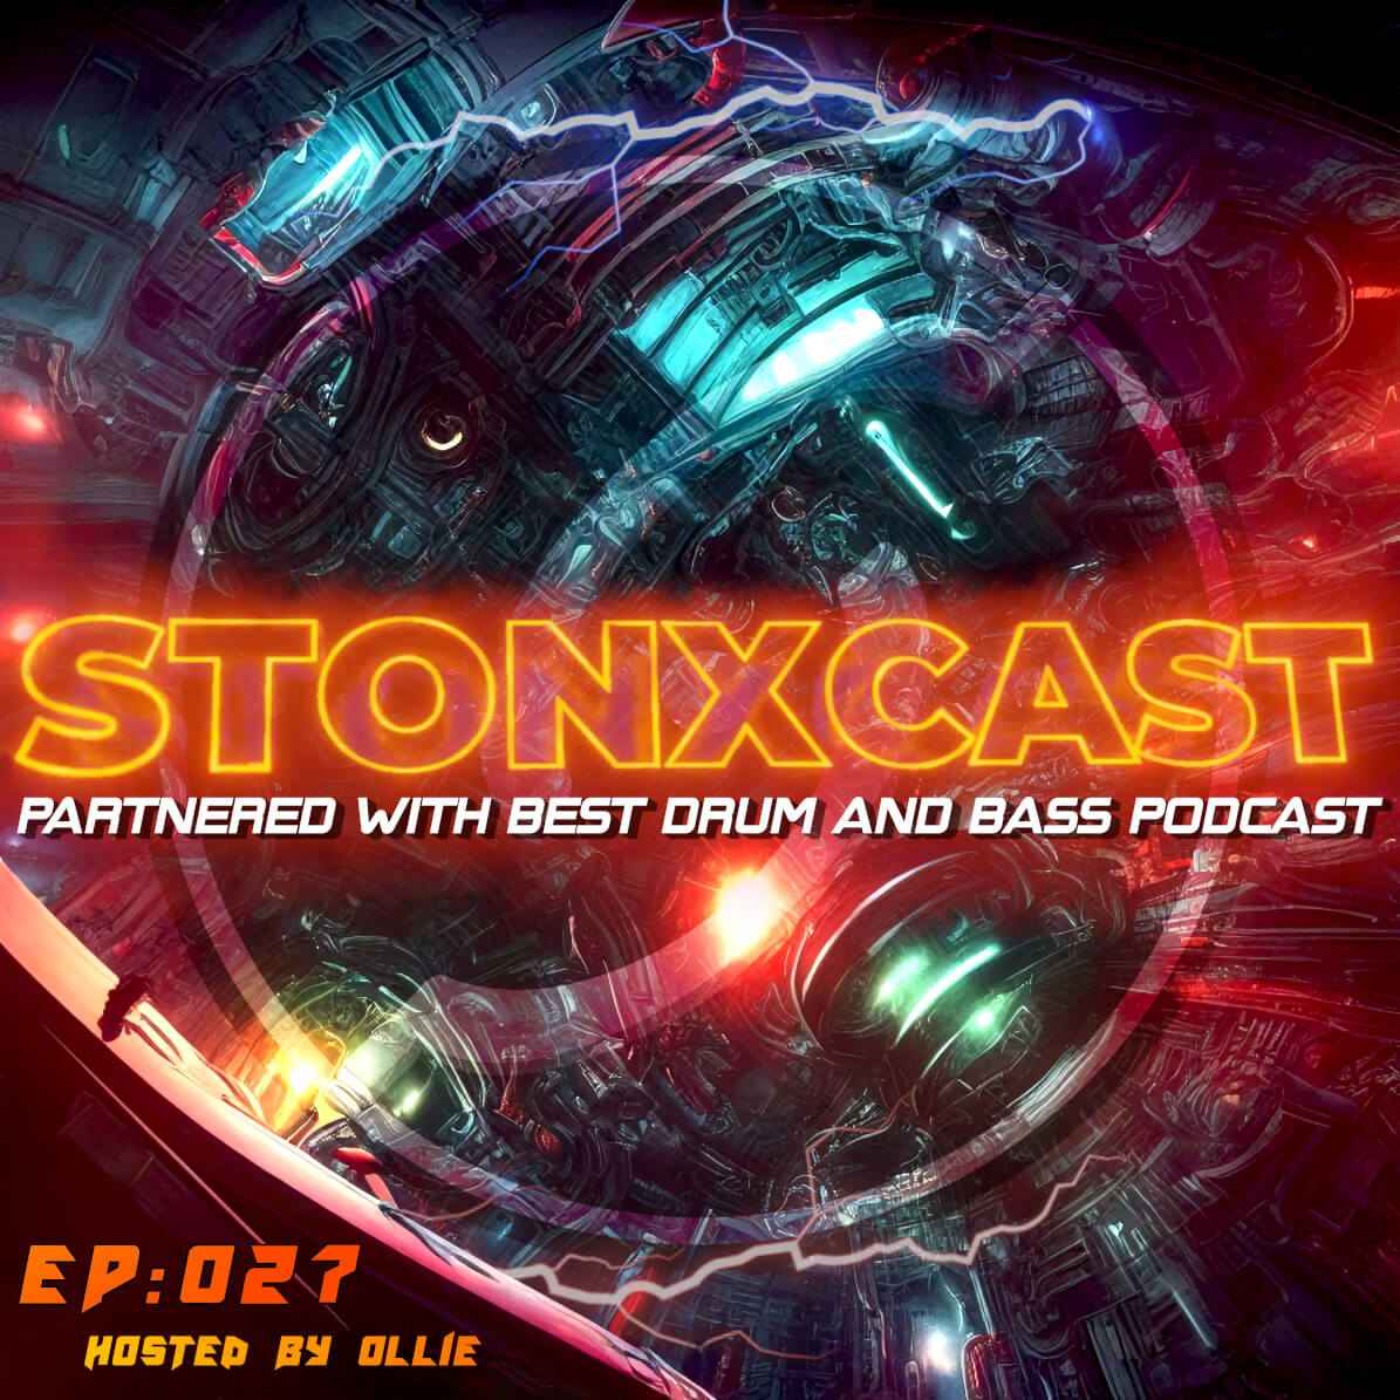  Stonxcast EP:027 - Hosted by Ollie Artwork